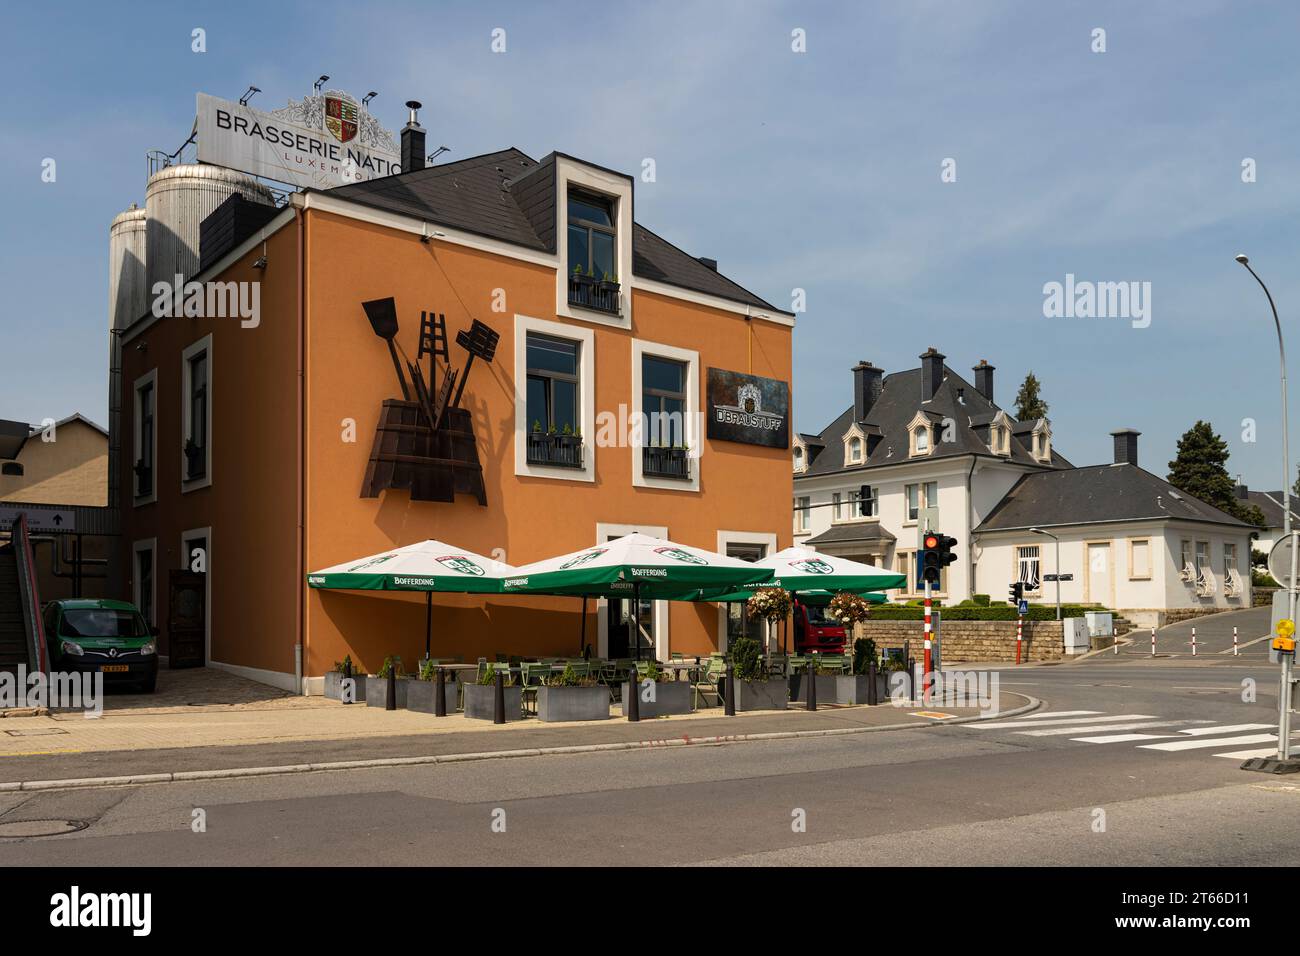 Brasserie D´Braustuff restaurant and brewery, featuring beers produced by the Brasserie Nationale. Stock Photo